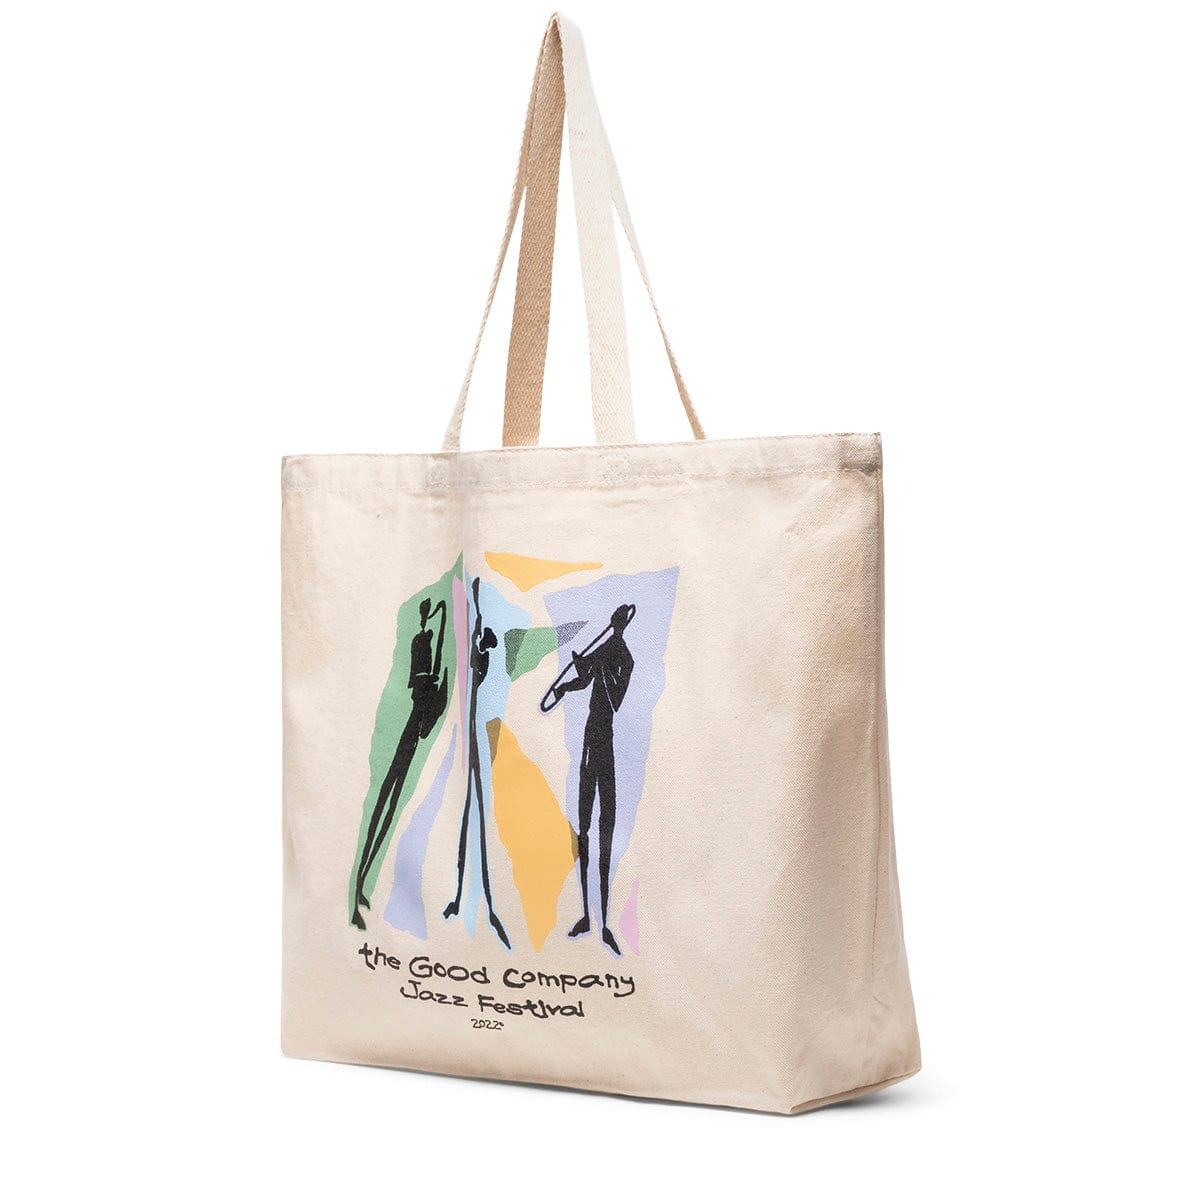 The Good Company Bags TAN / O/S JAZZ FEST TOTE